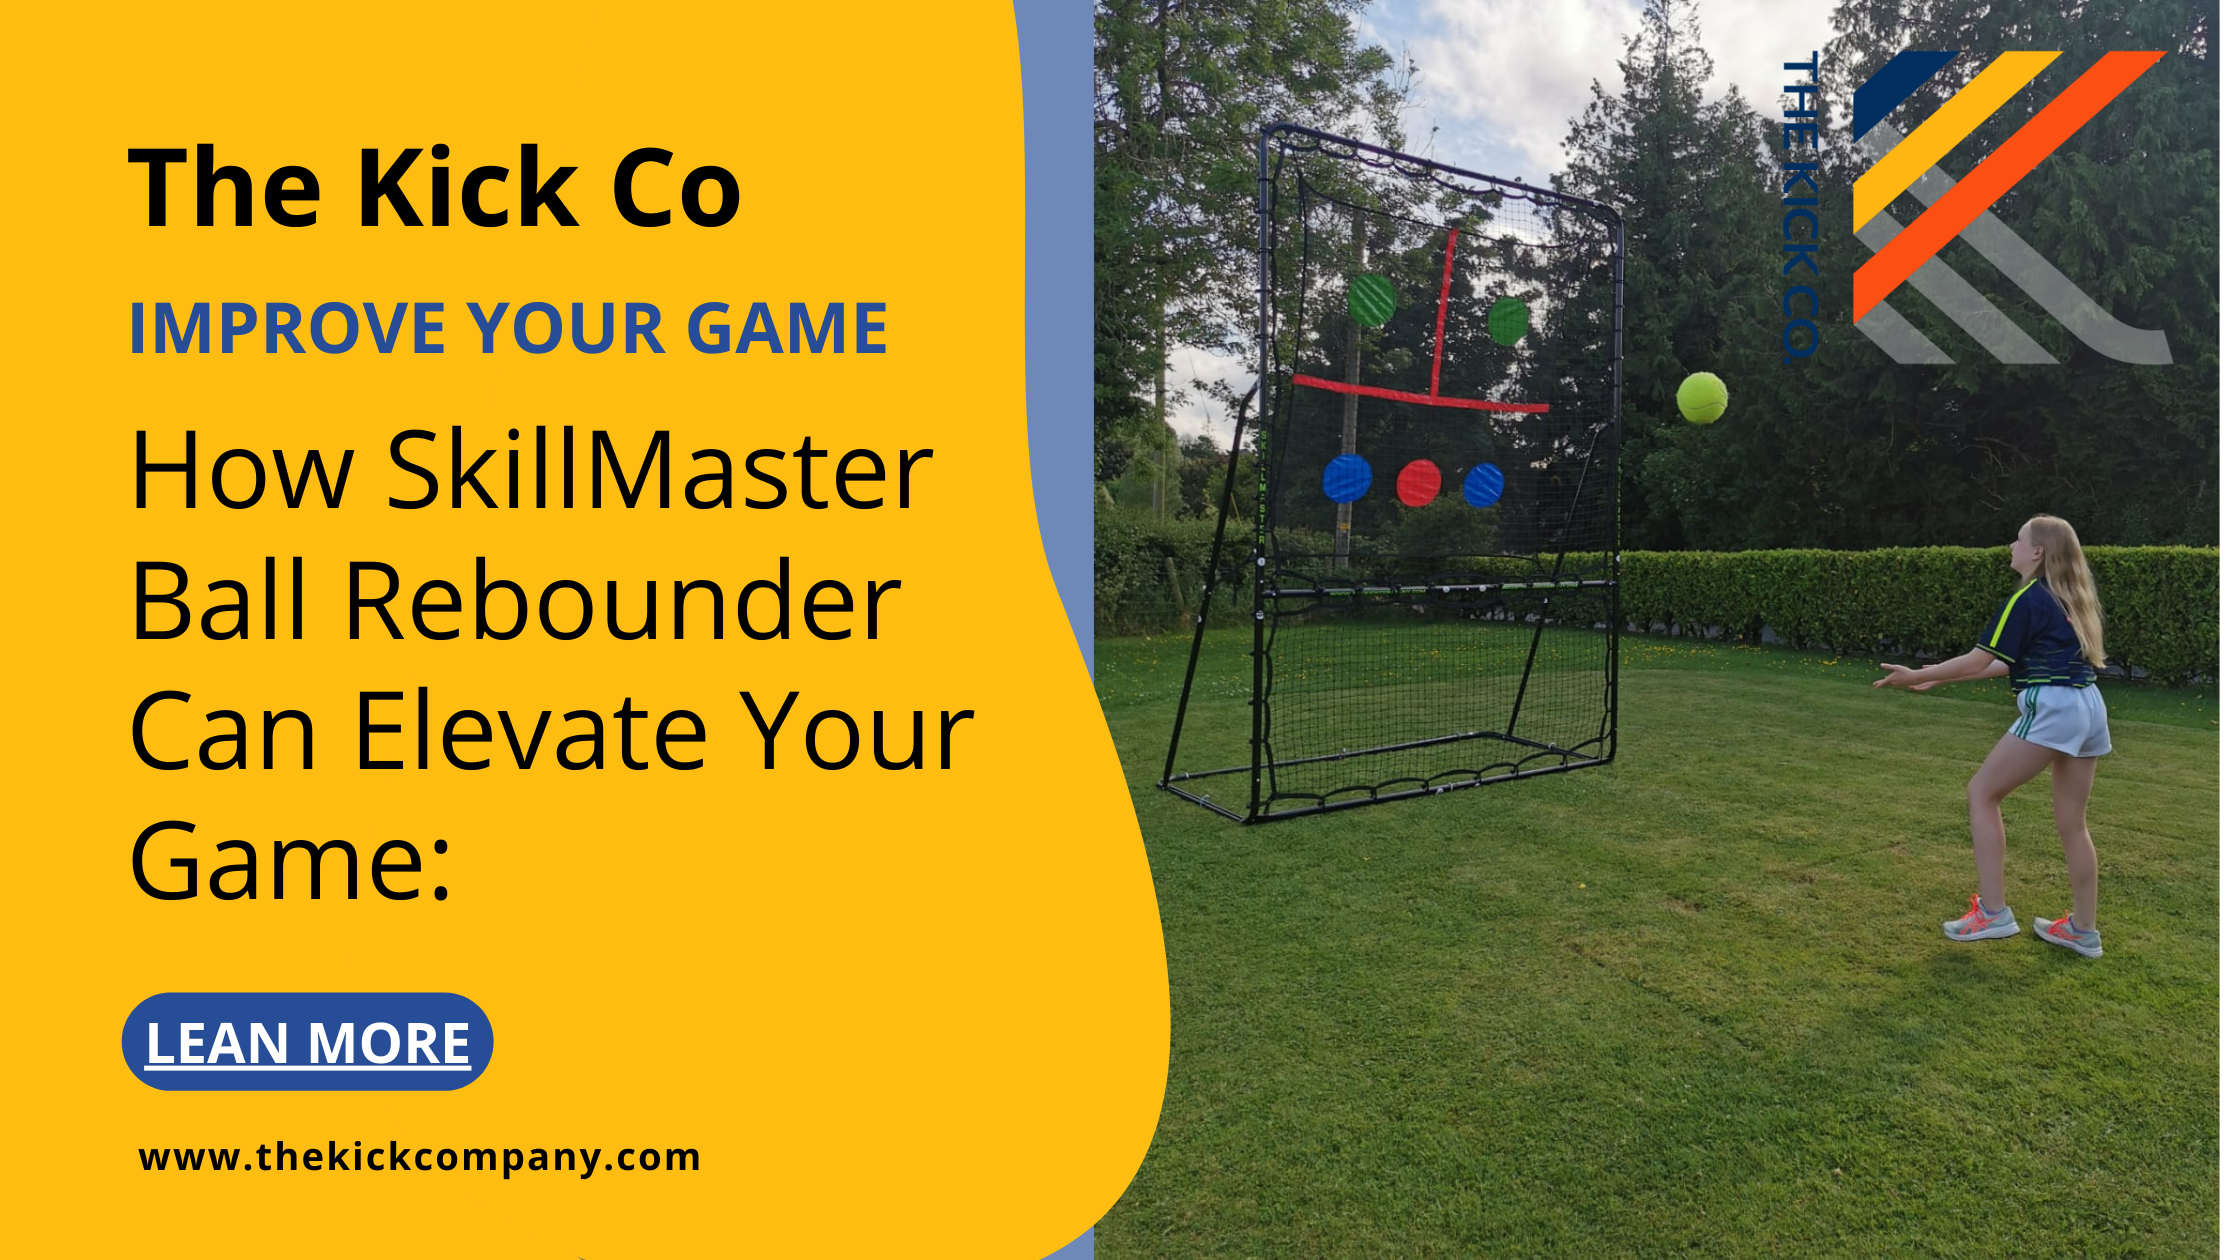 How SkillMaster Ball Rebounder Can Elevate Your Game: The Power of Deliberate Practice